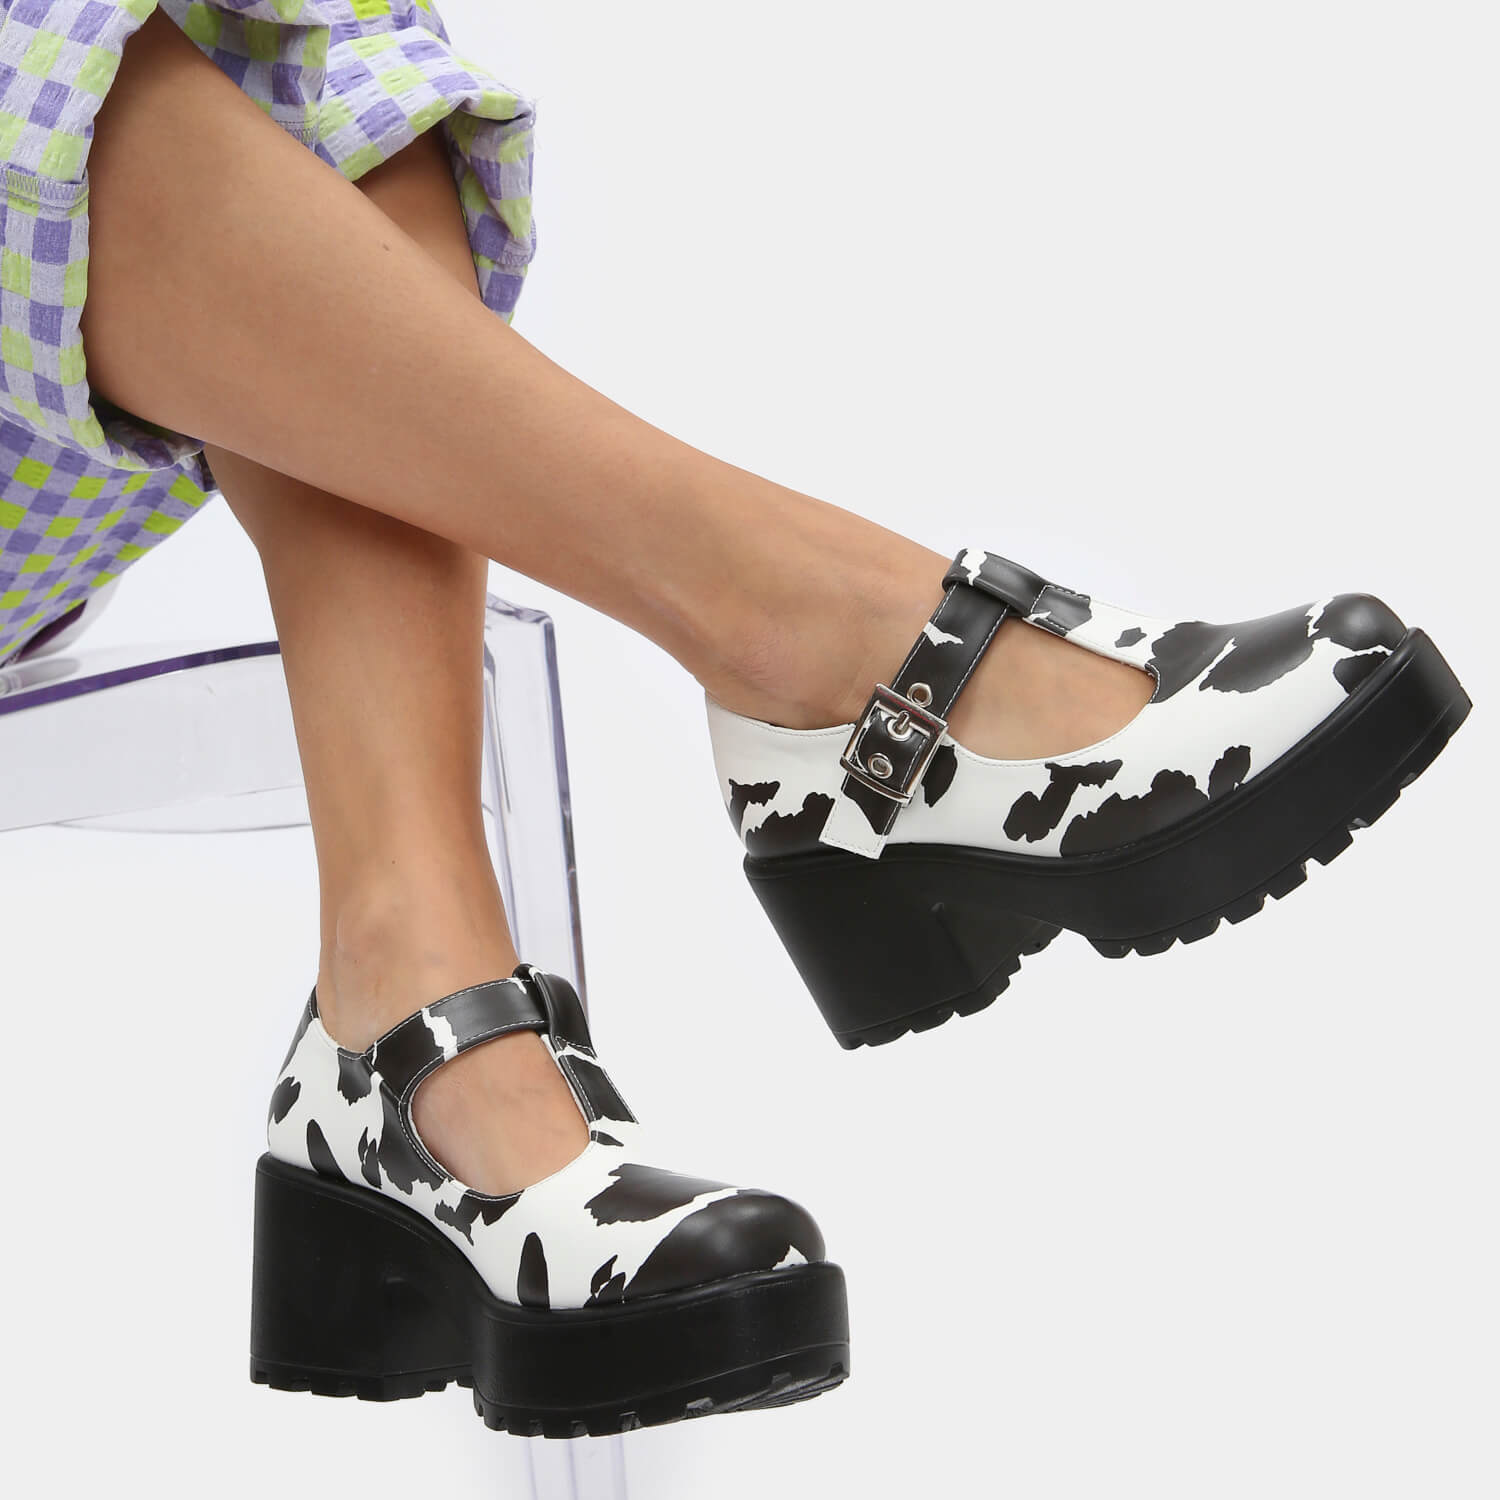 Sai Cow Print Mary Jane Shoes 'Nettie Edition' - Mary Janes - KOI Footwear - White - Model Side View